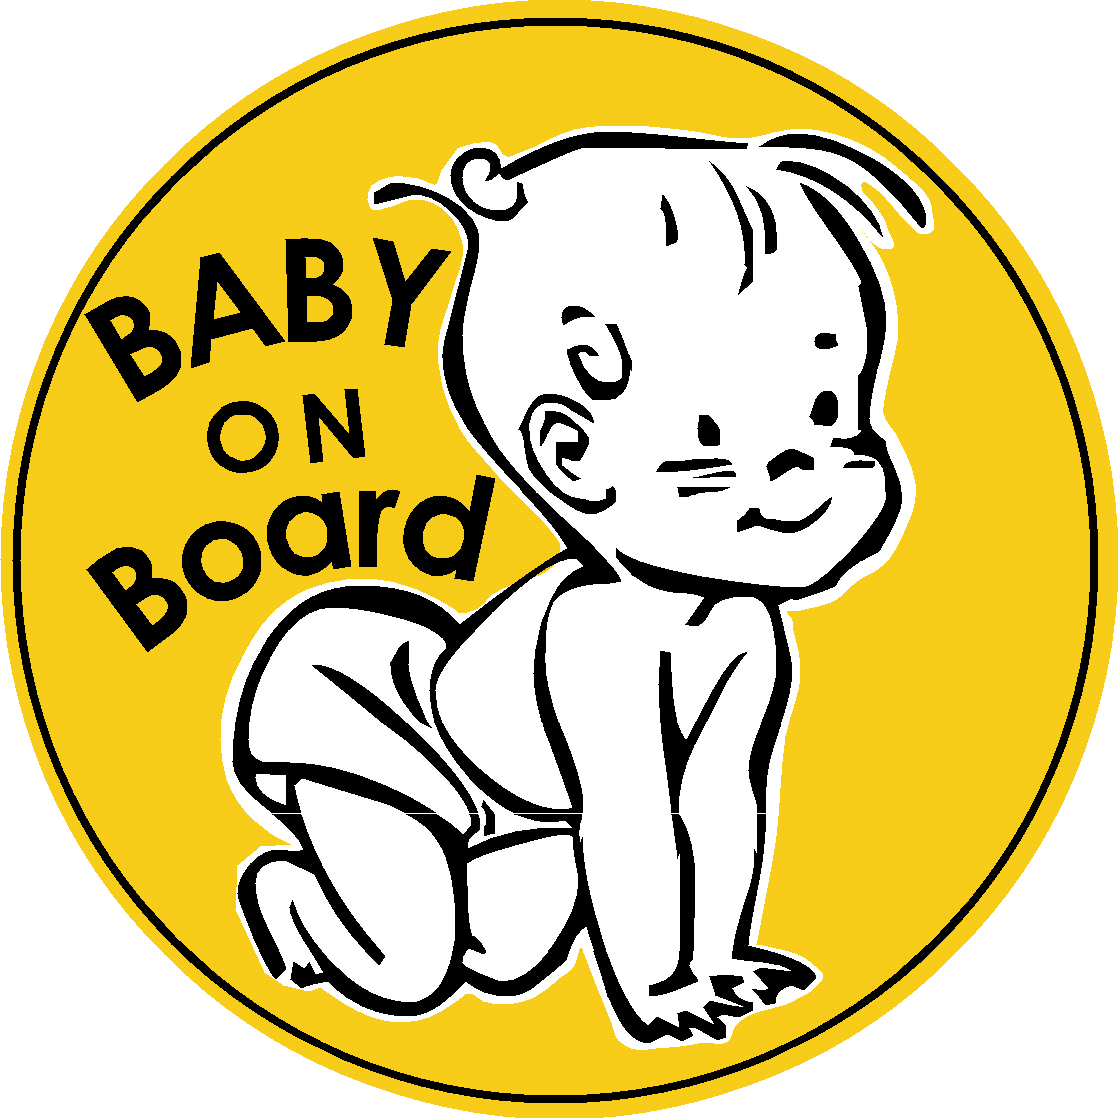 CAUTION BABY ON BOARD CIRCLE